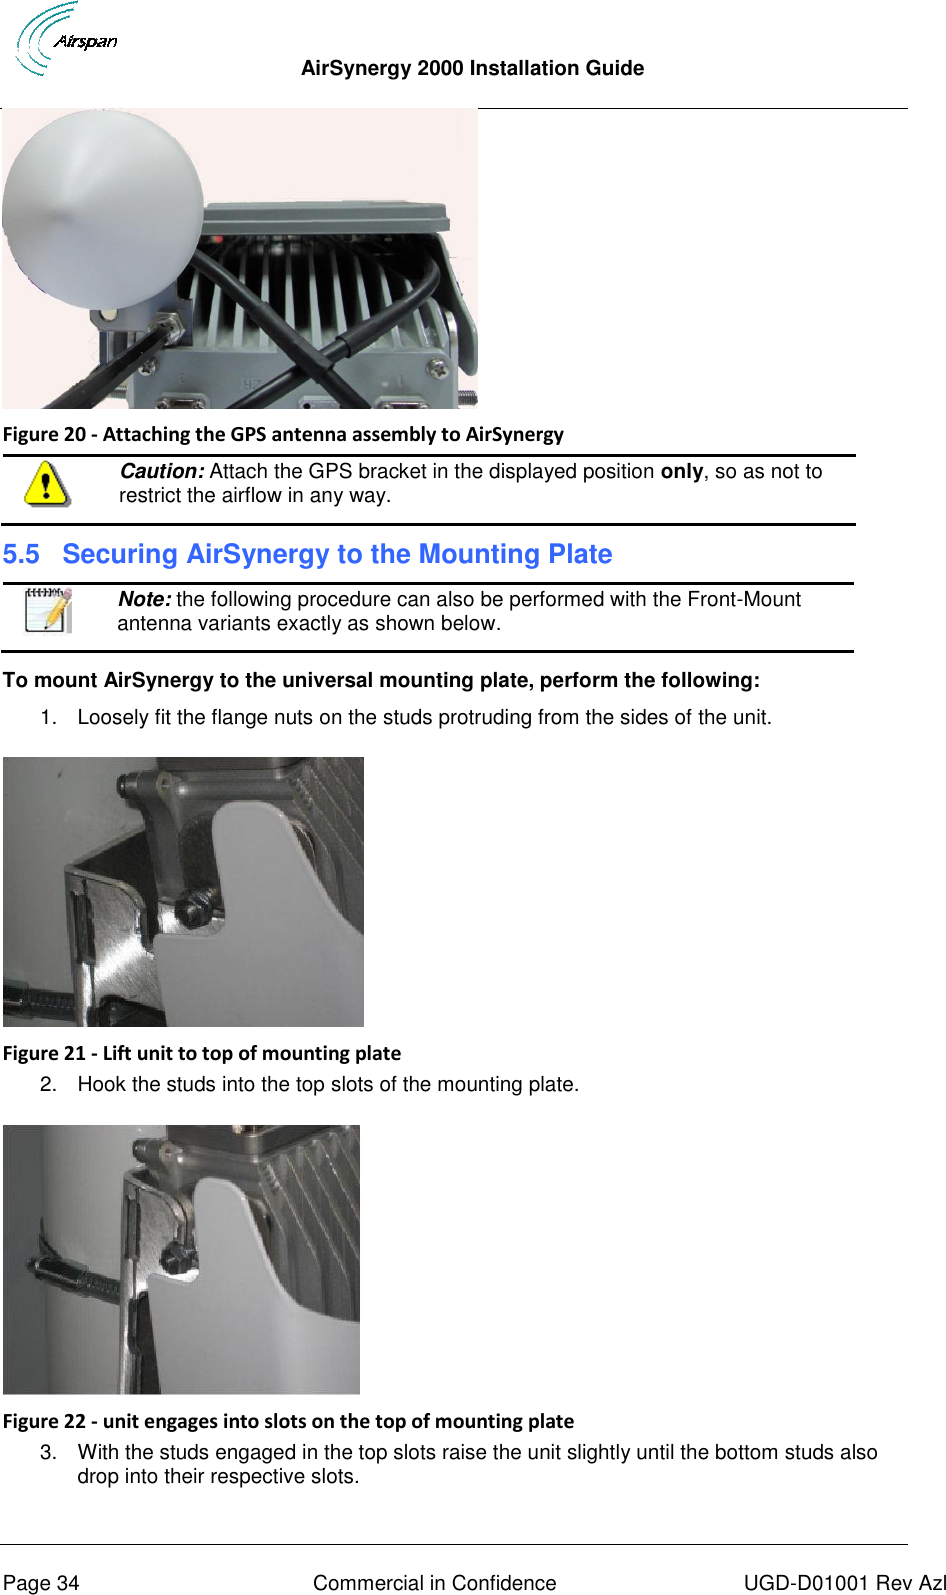  AirSynergy 2000 Installation Guide     Page 34  Commercial in Confidence  UGD-D01001 Rev Azl  Figure 20 - Attaching the GPS antenna assembly to AirSynergy  Caution: Attach the GPS bracket in the displayed position only, so as not to restrict the airflow in any way. 5.5  Securing AirSynergy to the Mounting Plate  Note: the following procedure can also be performed with the Front-Mount antenna variants exactly as shown below.  To mount AirSynergy to the universal mounting plate, perform the following: 1.  Loosely fit the flange nuts on the studs protruding from the sides of the unit.    Figure 21 - Lift unit to top of mounting plate 2.  Hook the studs into the top slots of the mounting plate.   Figure 22 - unit engages into slots on the top of mounting plate 3.  With the studs engaged in the top slots raise the unit slightly until the bottom studs also drop into their respective slots. 